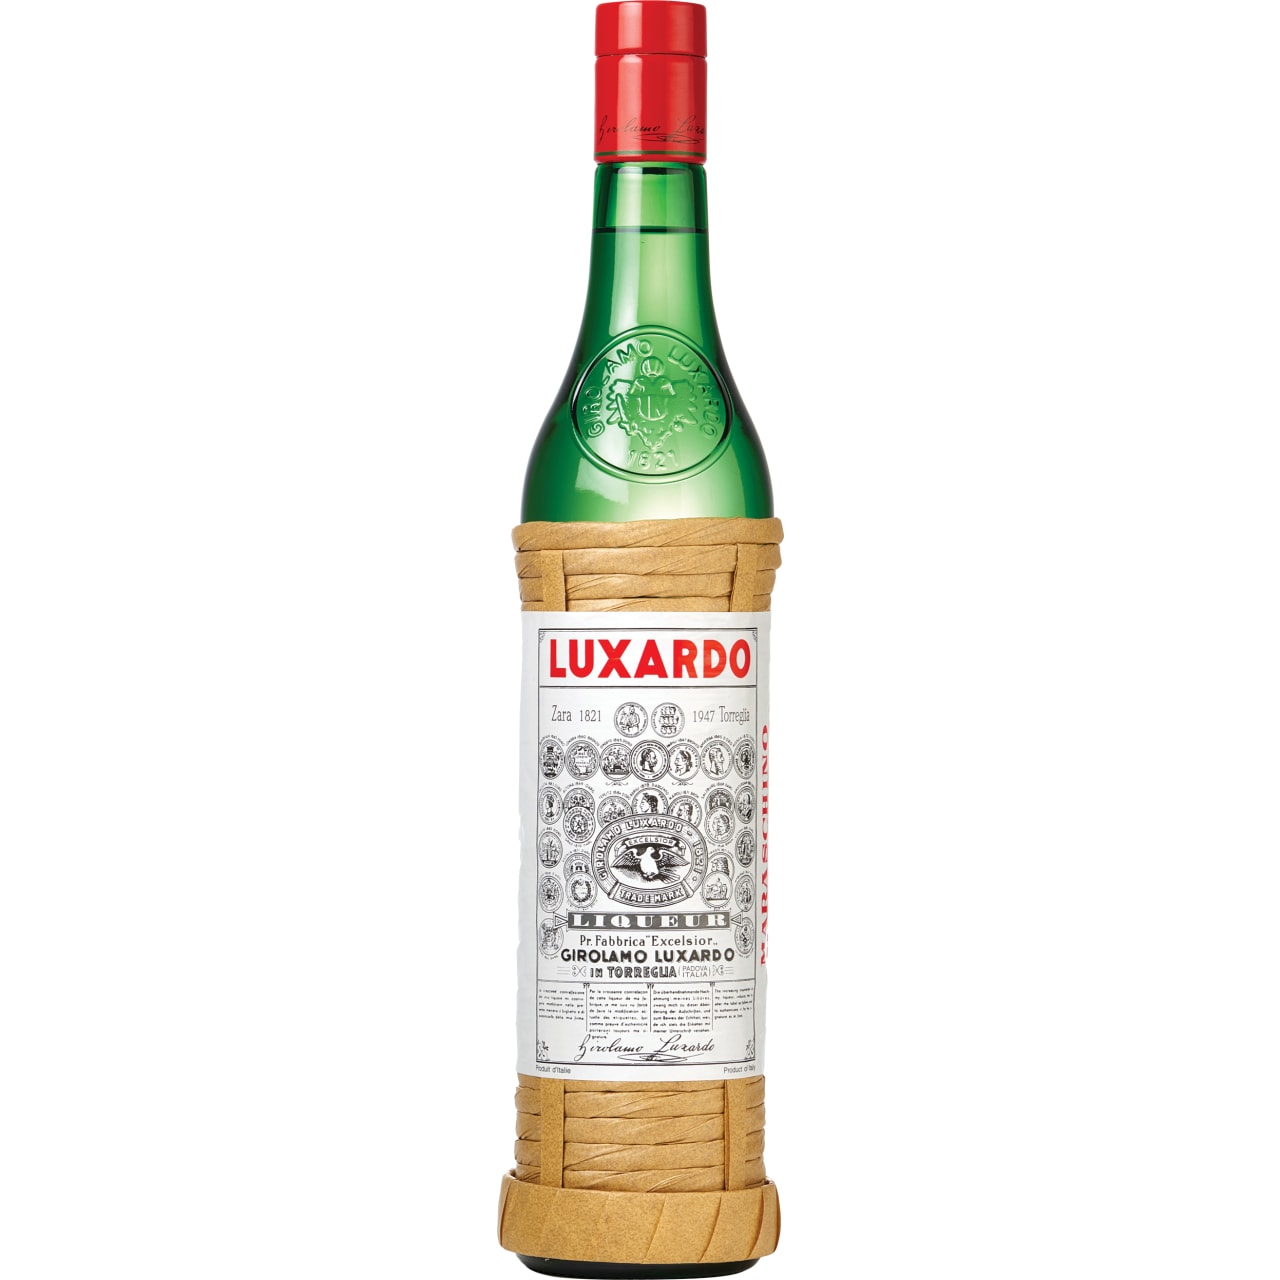 Luxardo Maraschino Liqueur is a speciality from Venice in Northern Italy. The distillate obtained from Maraska cherries has a light colour and a very intense aroma.